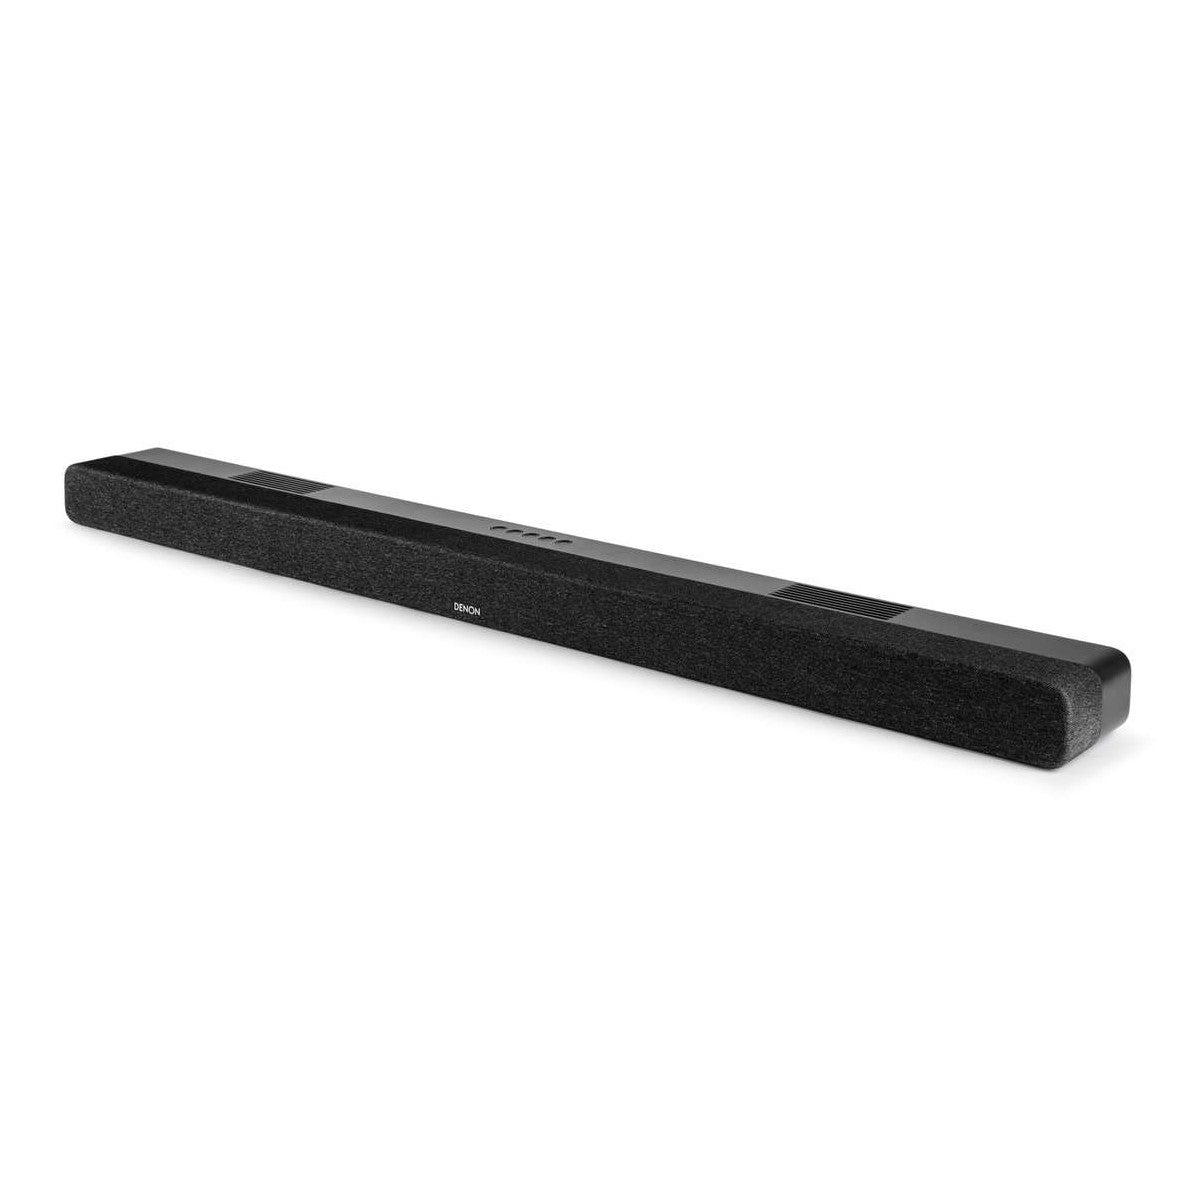 Denon DHT-S517 Sound bar with Dolby Atmos, Bluetooth and Wireless Subwoofer - Soundbar